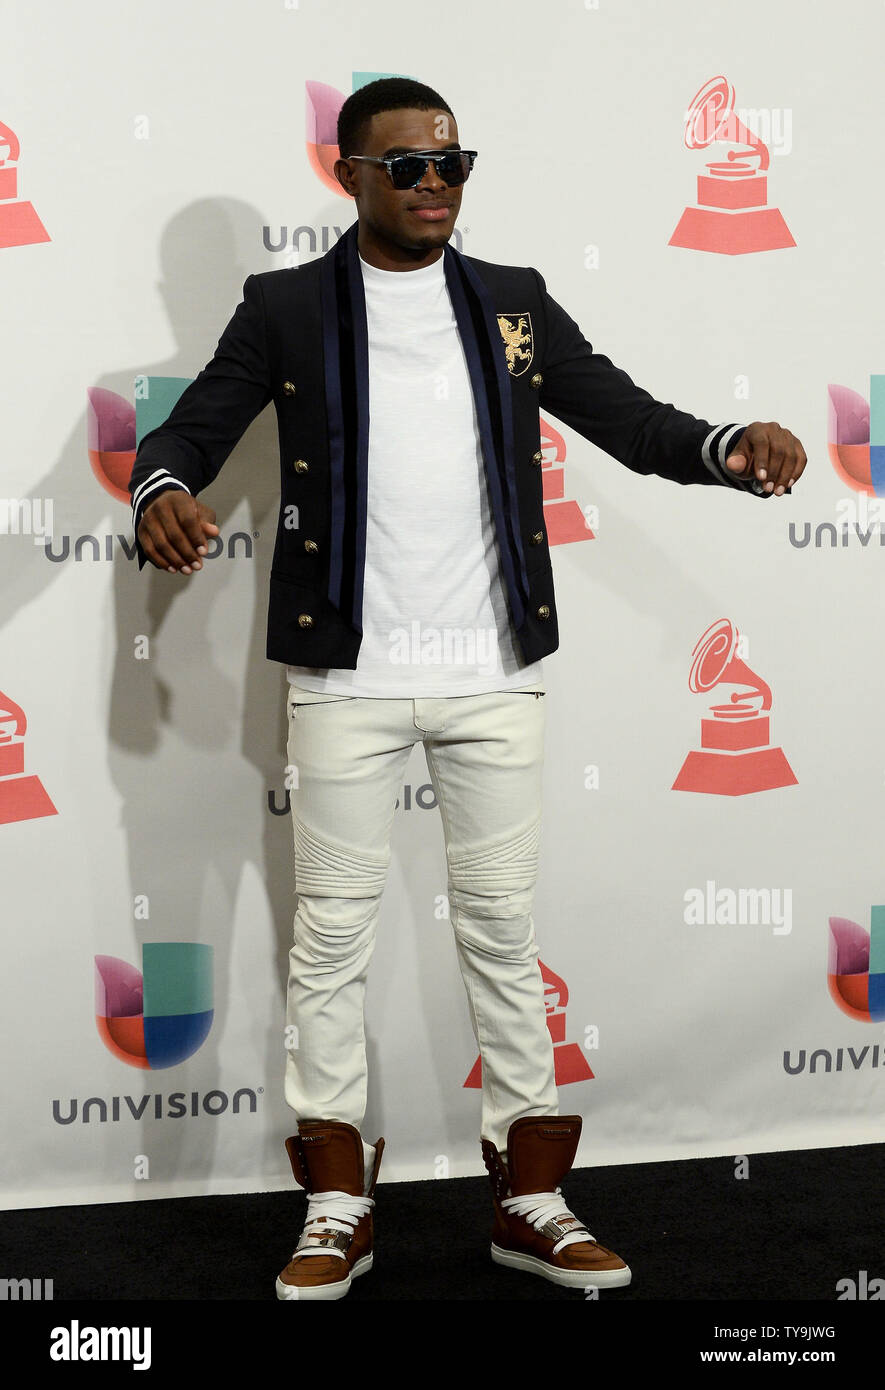 Omi poses backstage during the 16th Annual Latin Grammy Awards at the MGM Grand Garden Arena in Las Vegas, Nevada on November 19, 2015.   Photo by Jim Ruymen/UPI Stock Photo